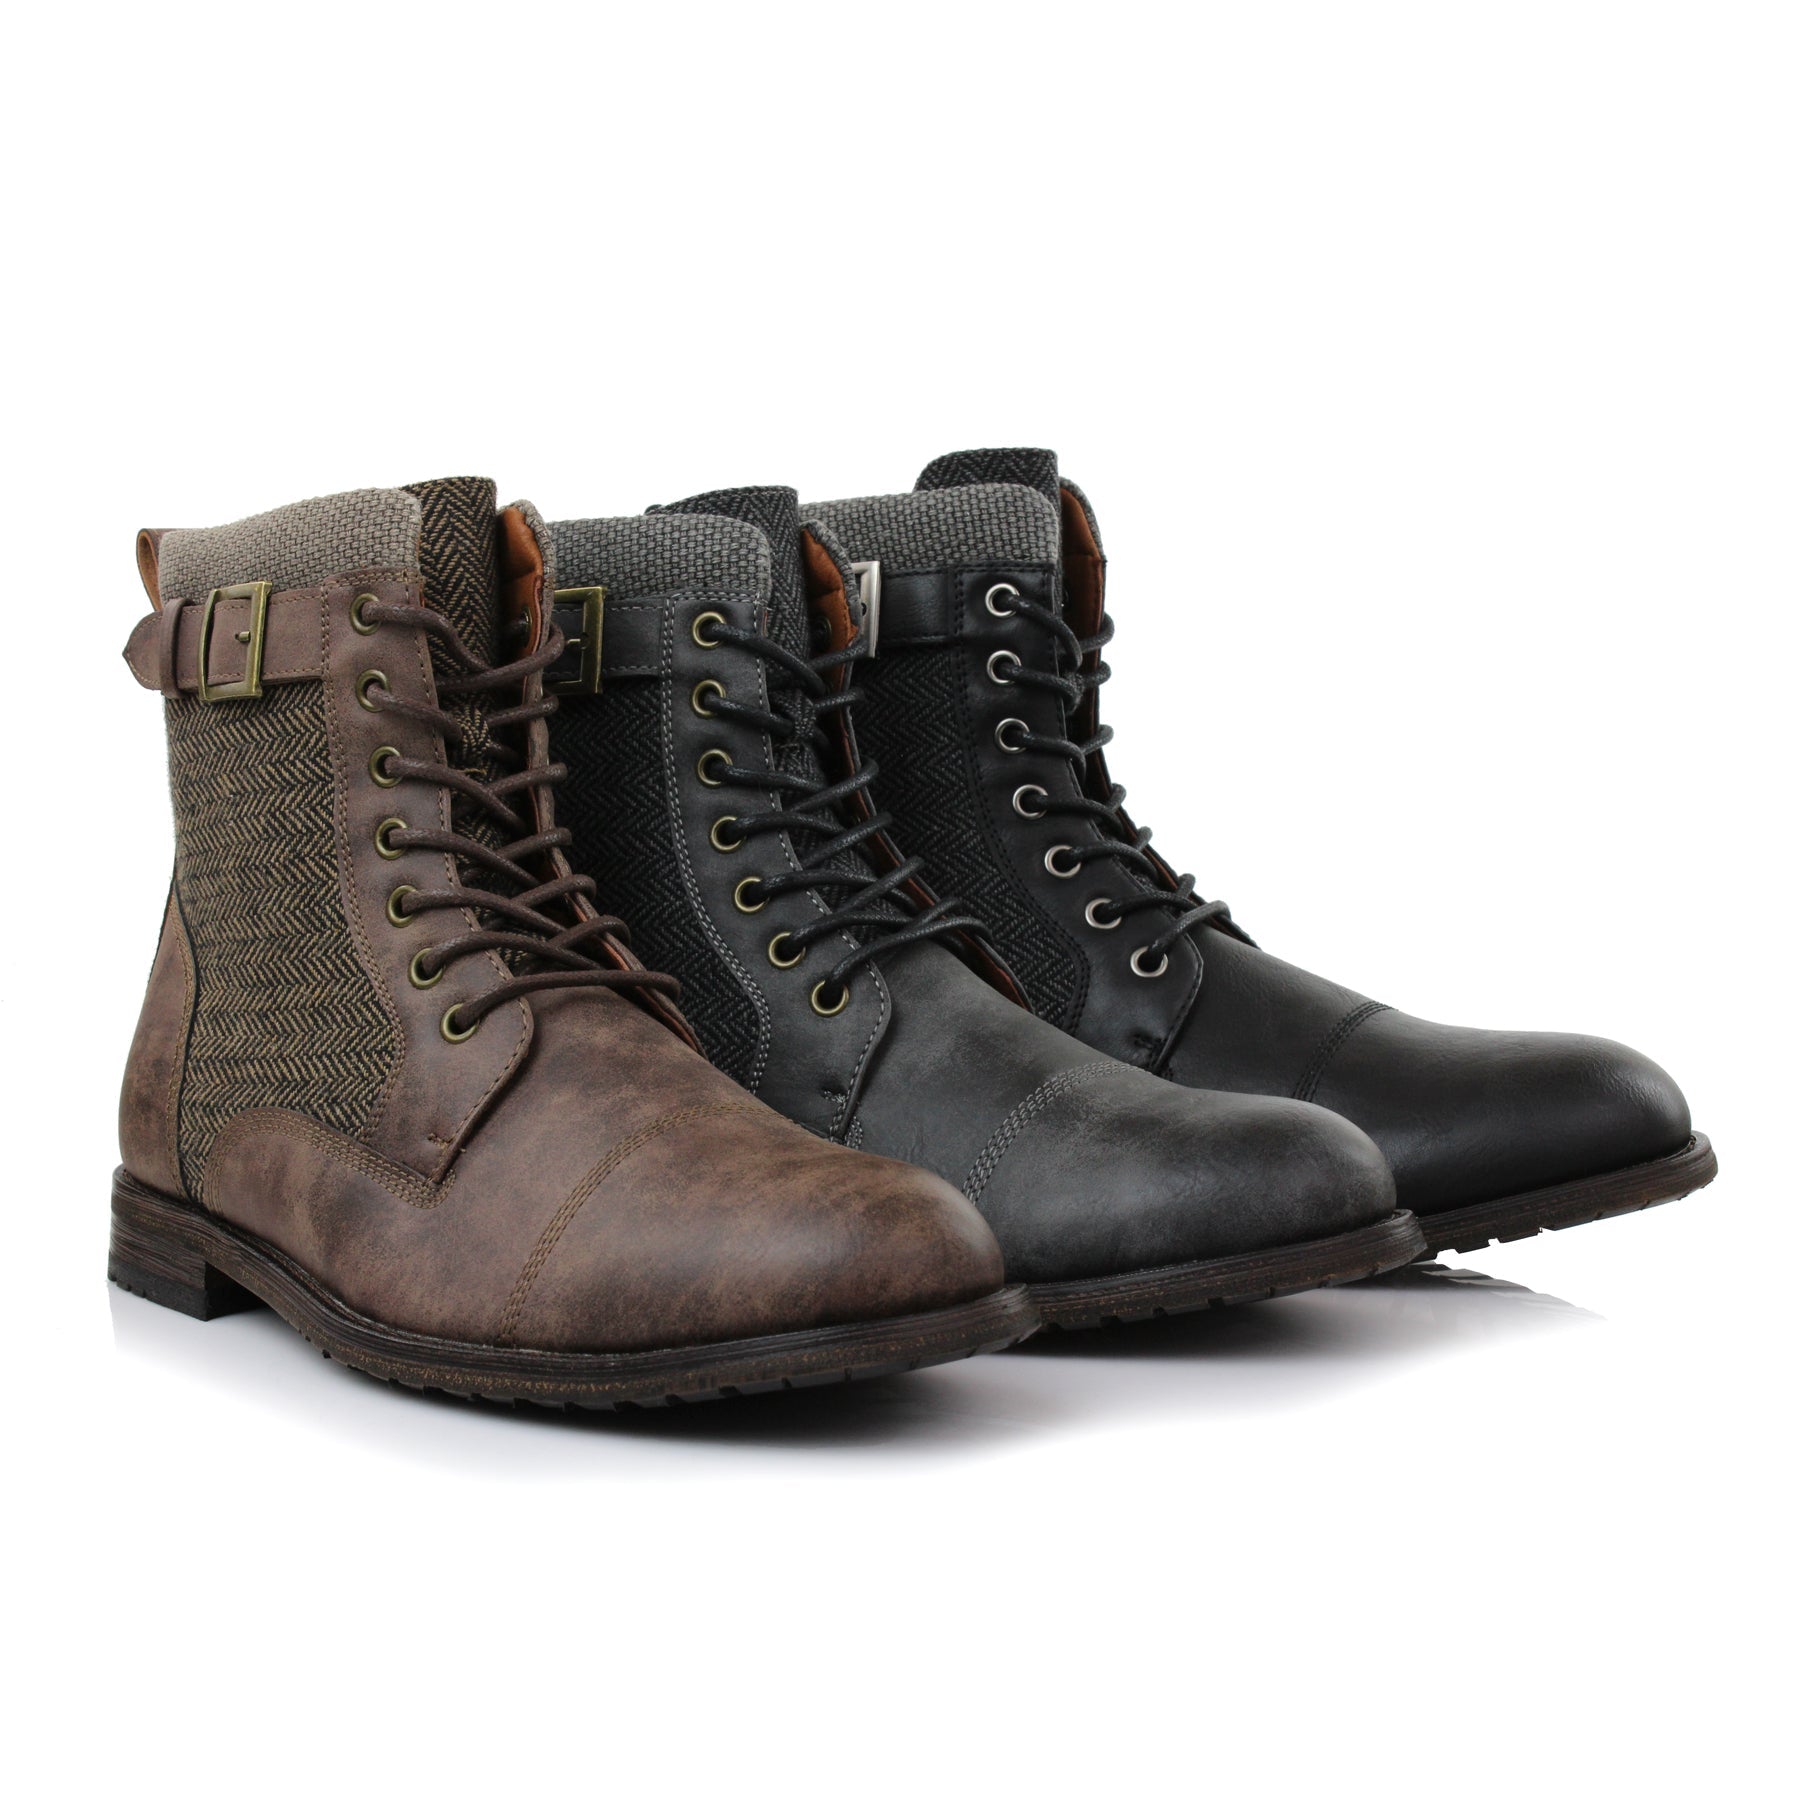 Rugged Duo-Textured Boots | Elijah by Polar Fox | Conal Footwear | Group Angle View